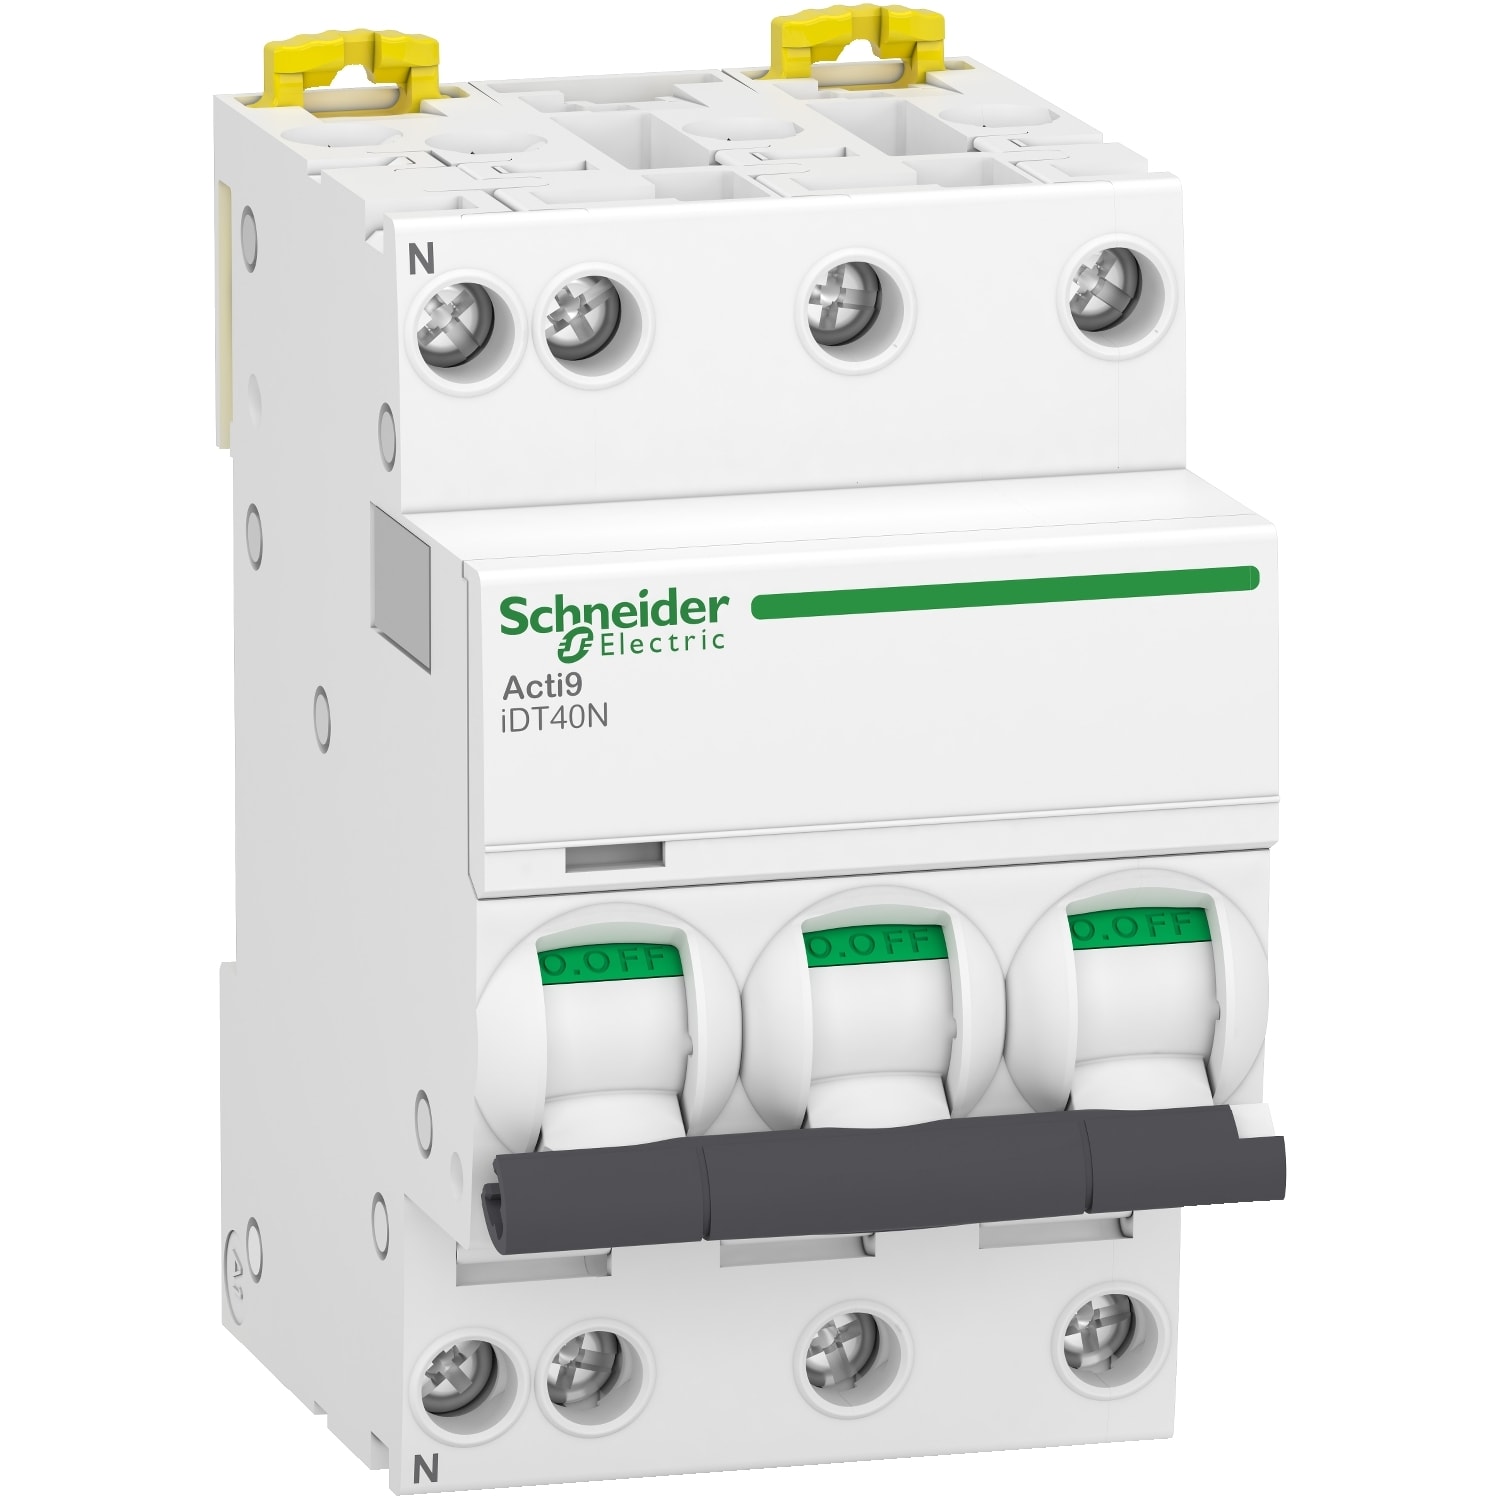 Schneider Electric - Acti9 iDT40N - Disjoncteur modulaire - 3P+N - 25A - Courbe C - 6000A-10kA